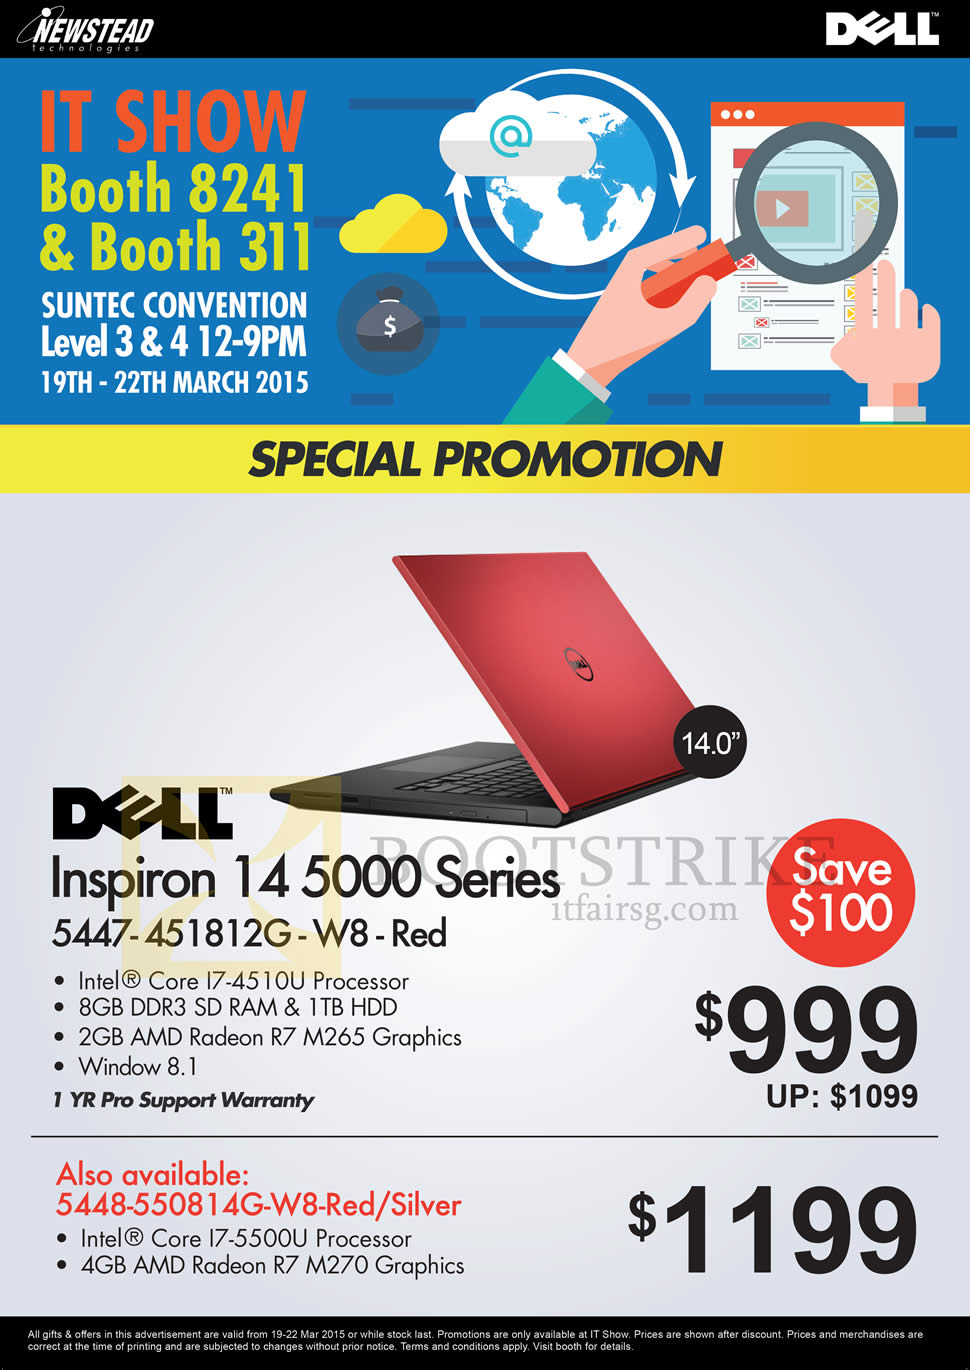 IT SHOW 2015 price list image brochure of Dell Newstead Inspiron 14 5000 Series Notebook